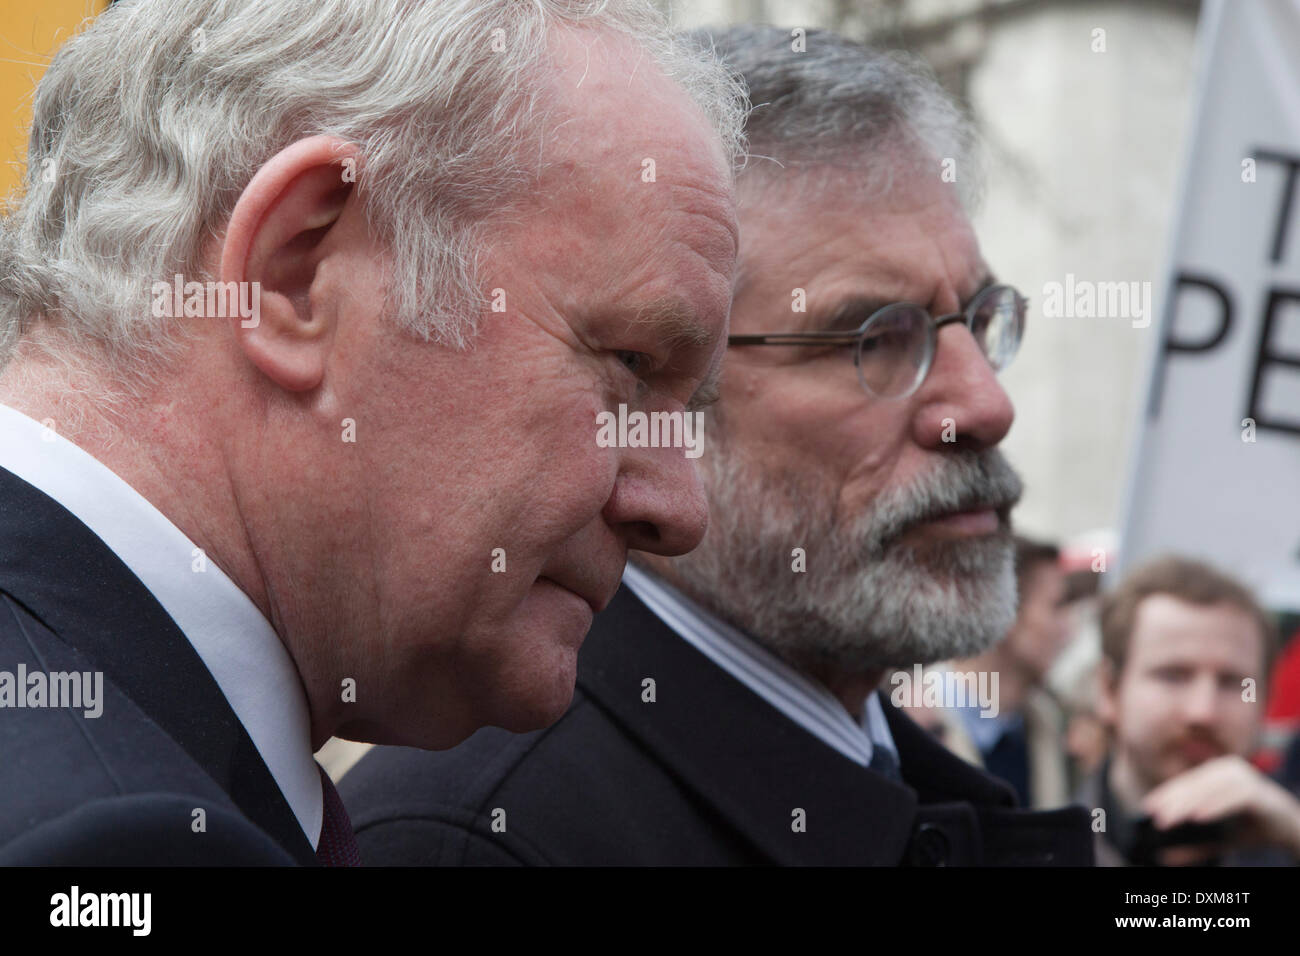 London, UK. 27 March 2014. Sinn Fein politicians Martin McGuinness and Gerry Adams after the funeral service of Tony Benn. Funeral service of Labour Politician Tony Benn at St Margaret's Church, Westminster Abbey, London, UK. Photo: Nick Savage/Alamy Live News Stock Photo